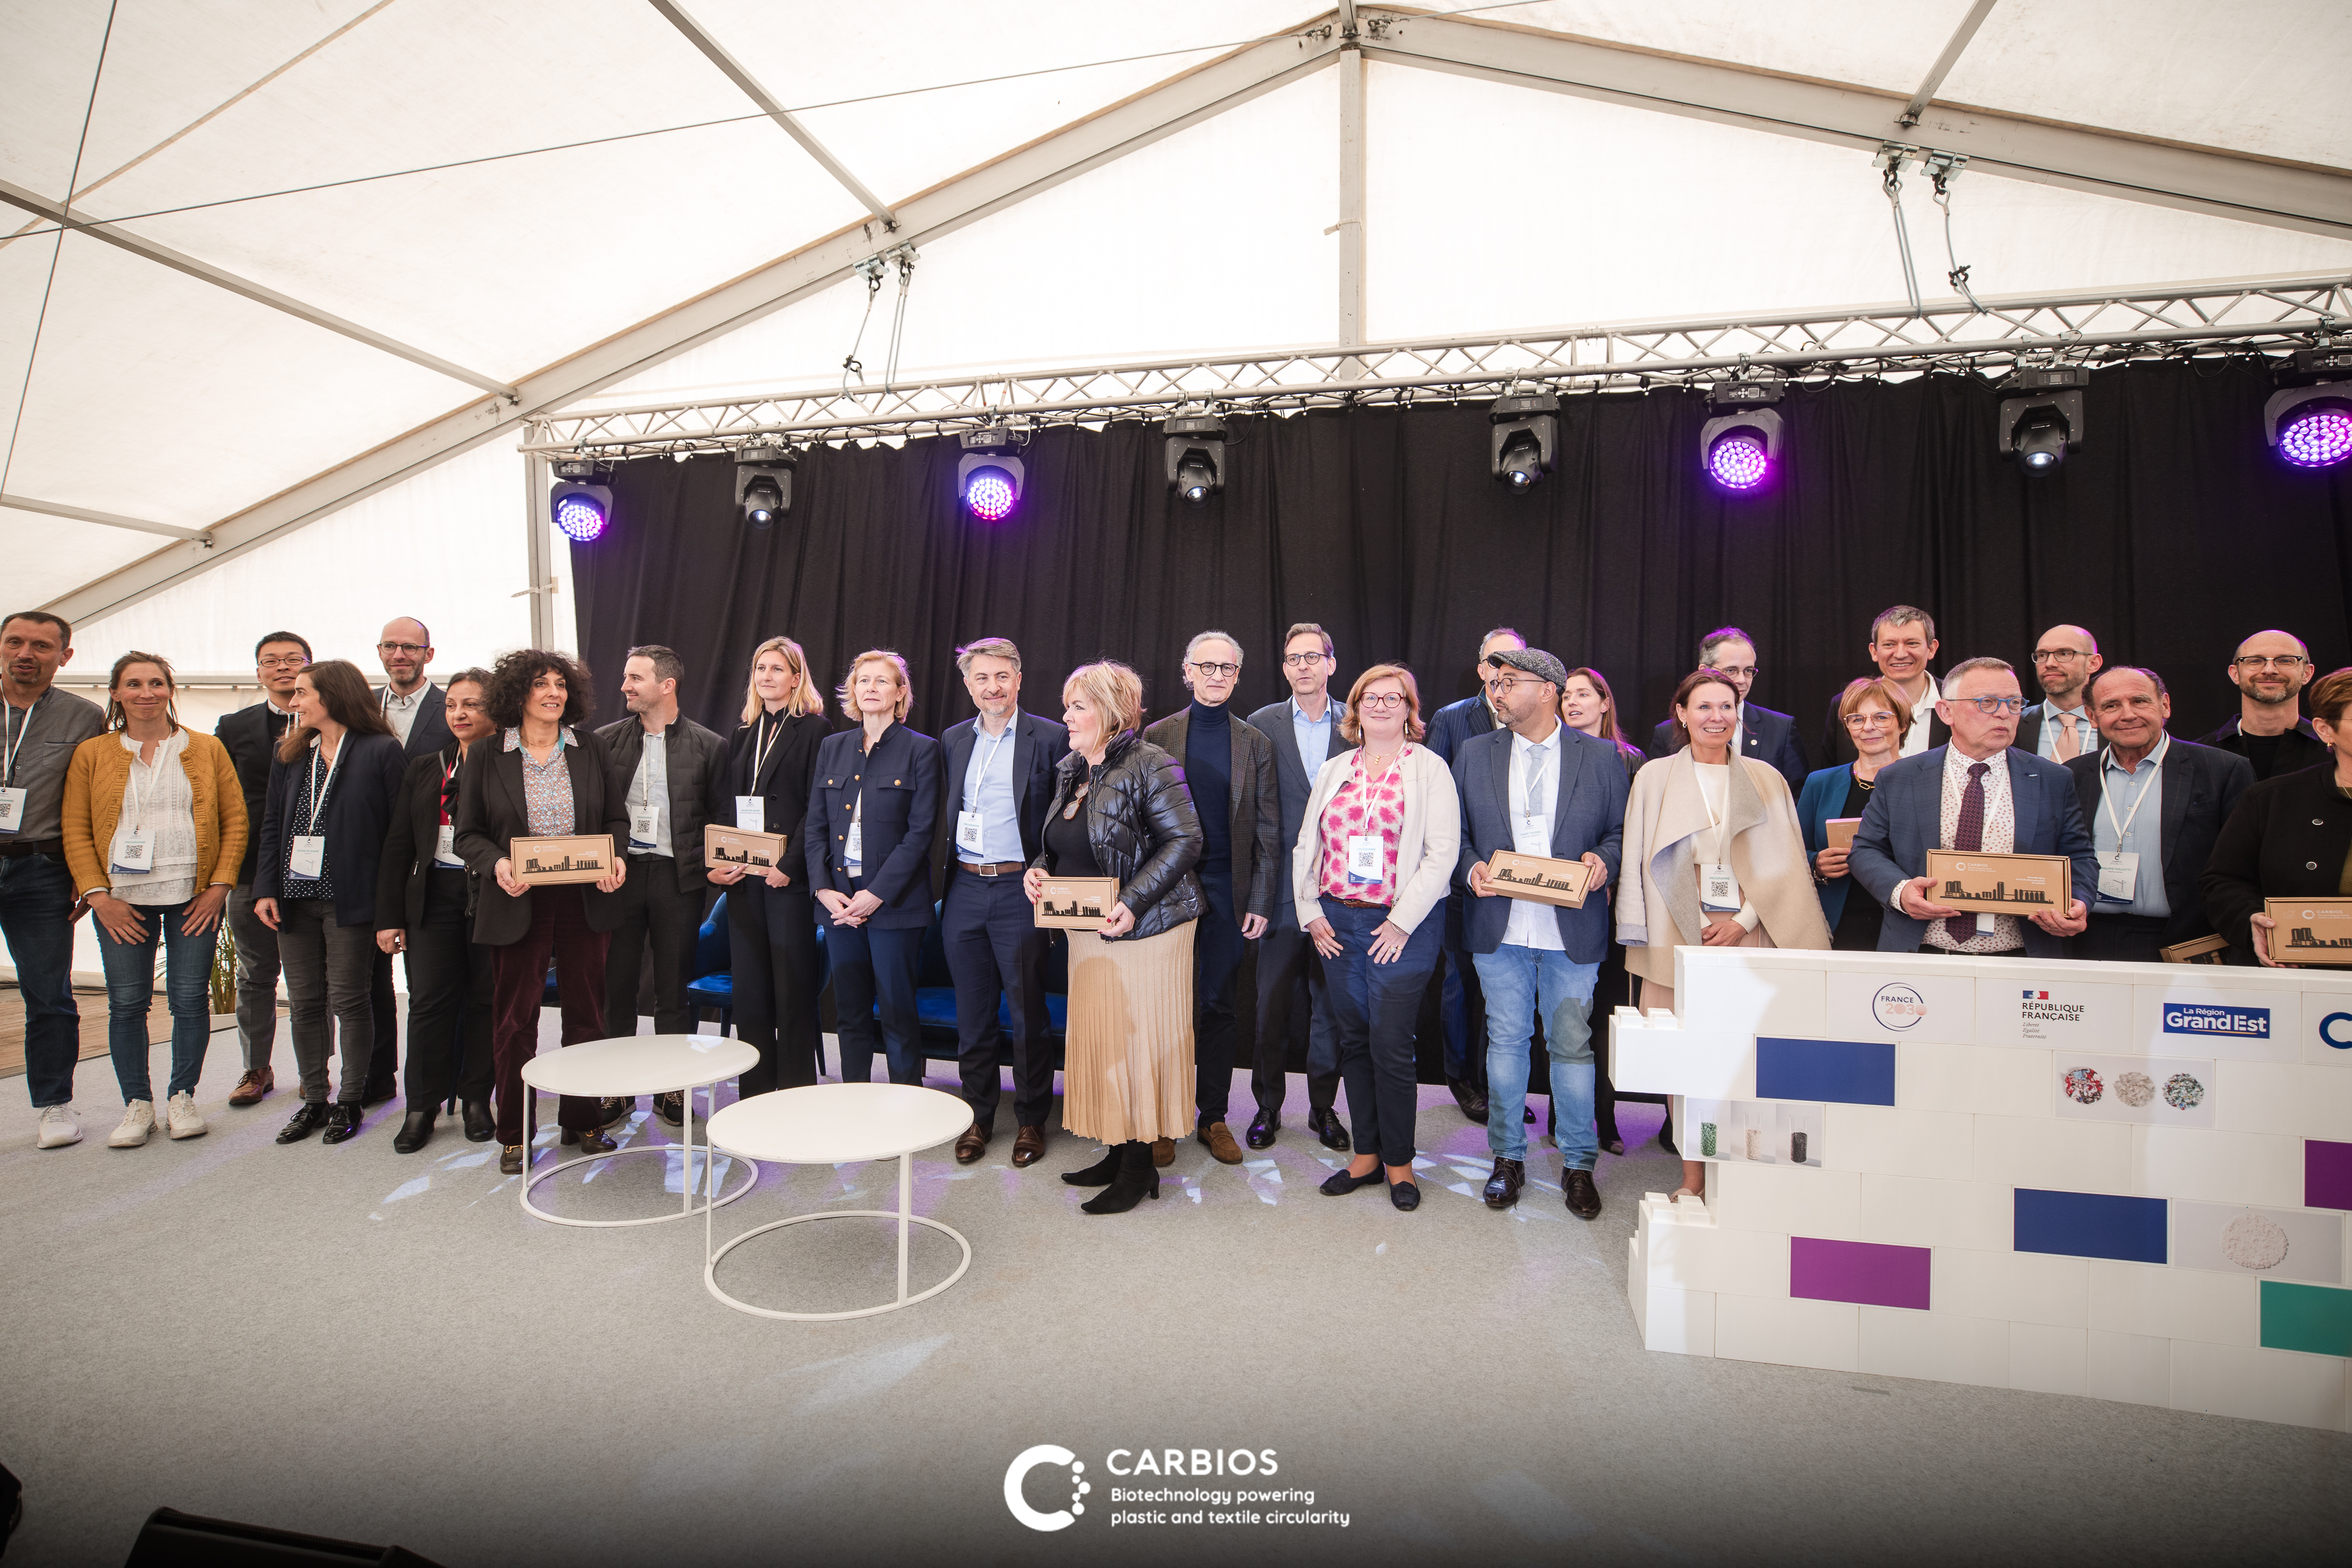 CARBIOS and representatives of local authorities, partner brands and industrial partners celebrate the groundbreaking ceremony for the world's first PET biorecycling plant